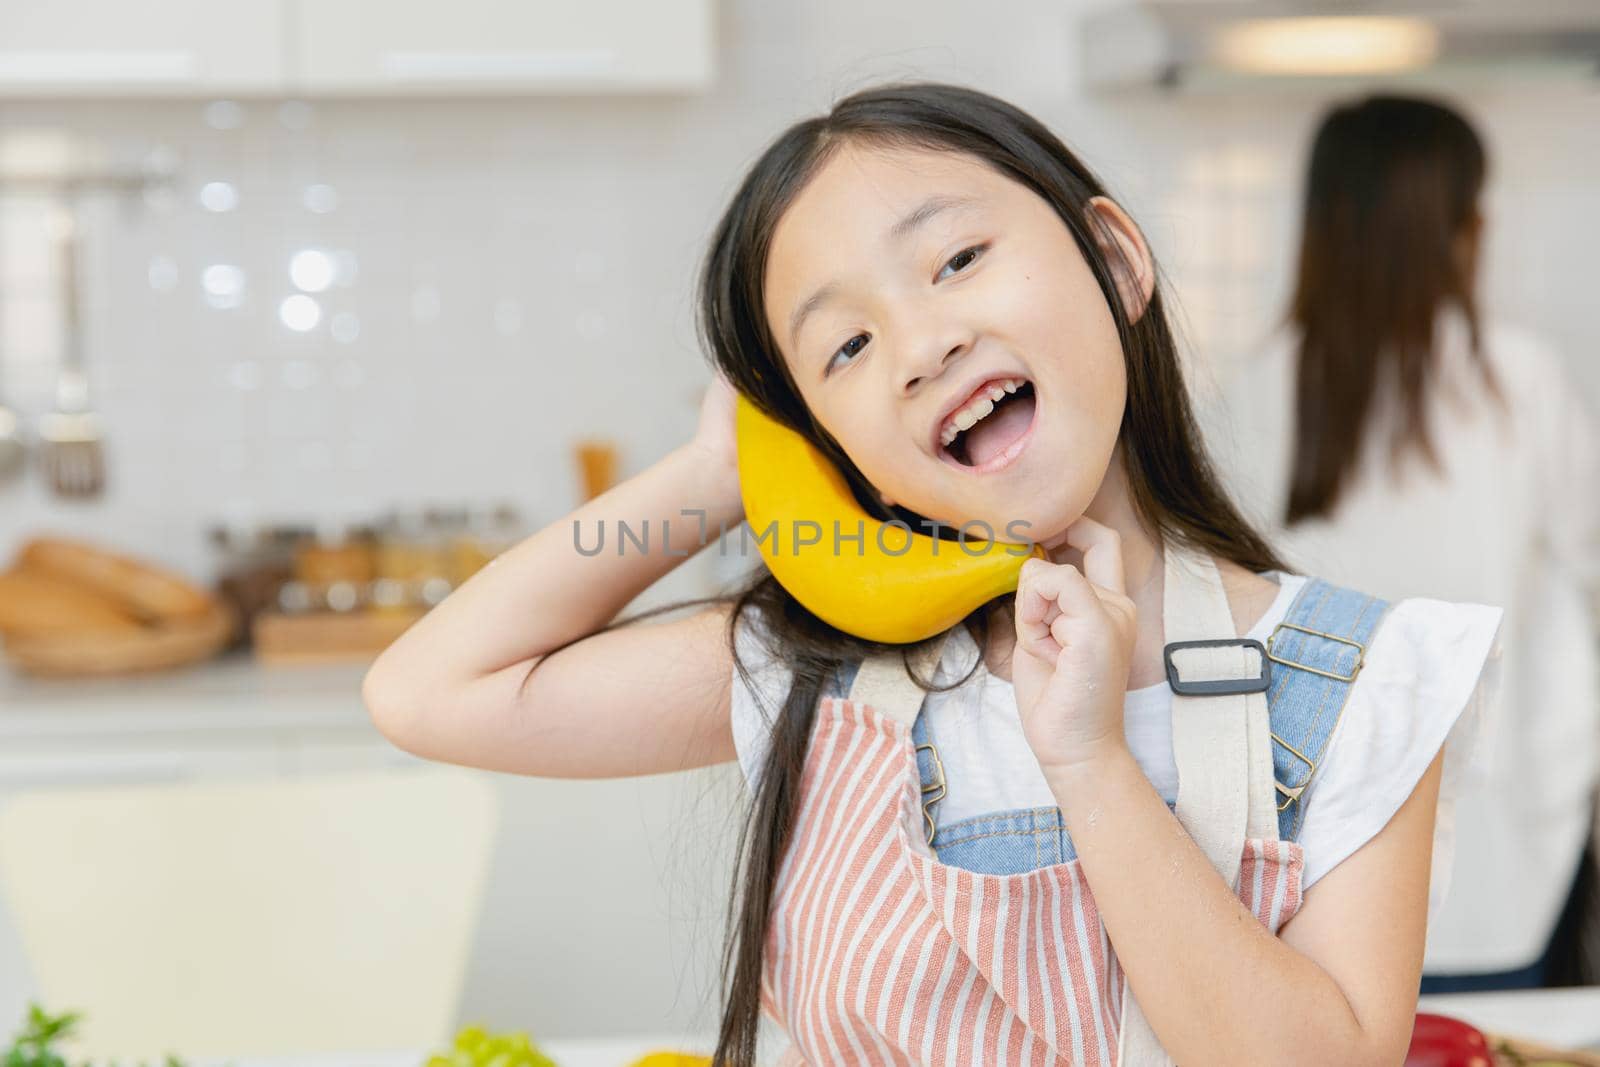 Cute girl child enjoy funny candid moment playing with banana at home kitchen. by qualitystocks